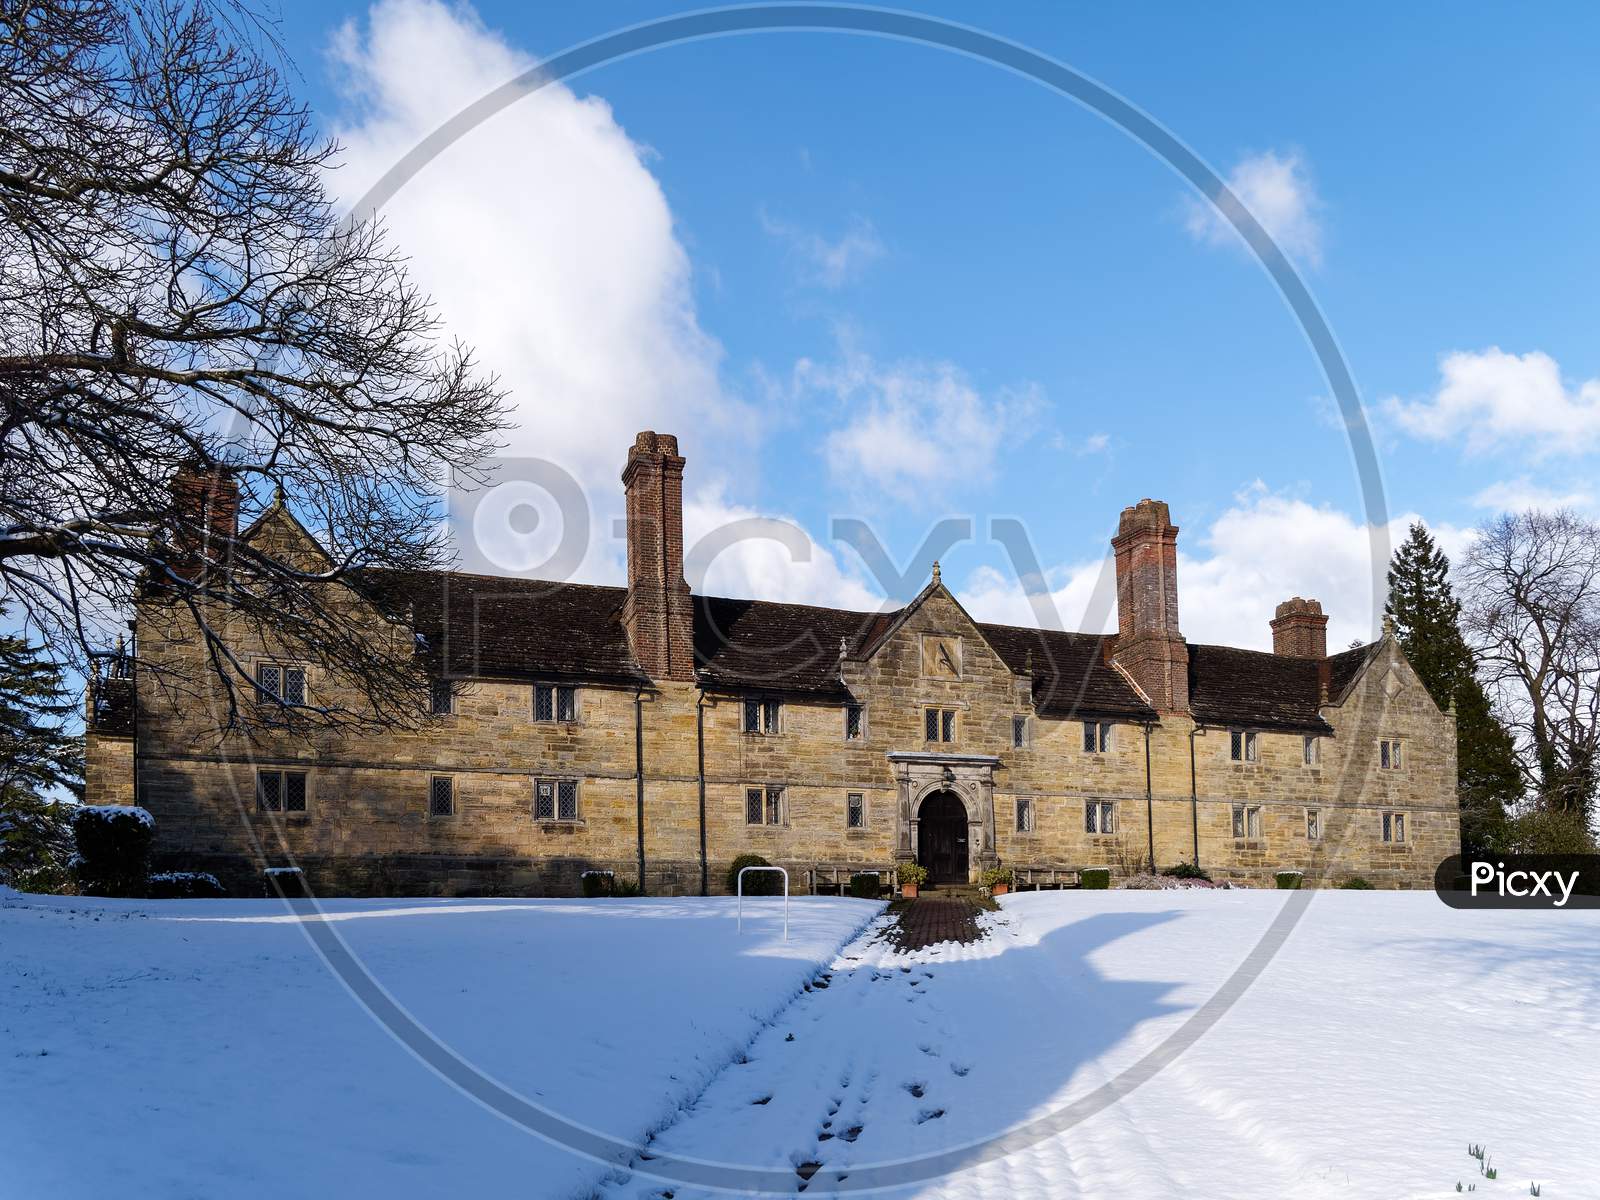 East Grinstead, West Sussex/Uk - February 27 : Sackville College In East Grinstead On February 27, 2018